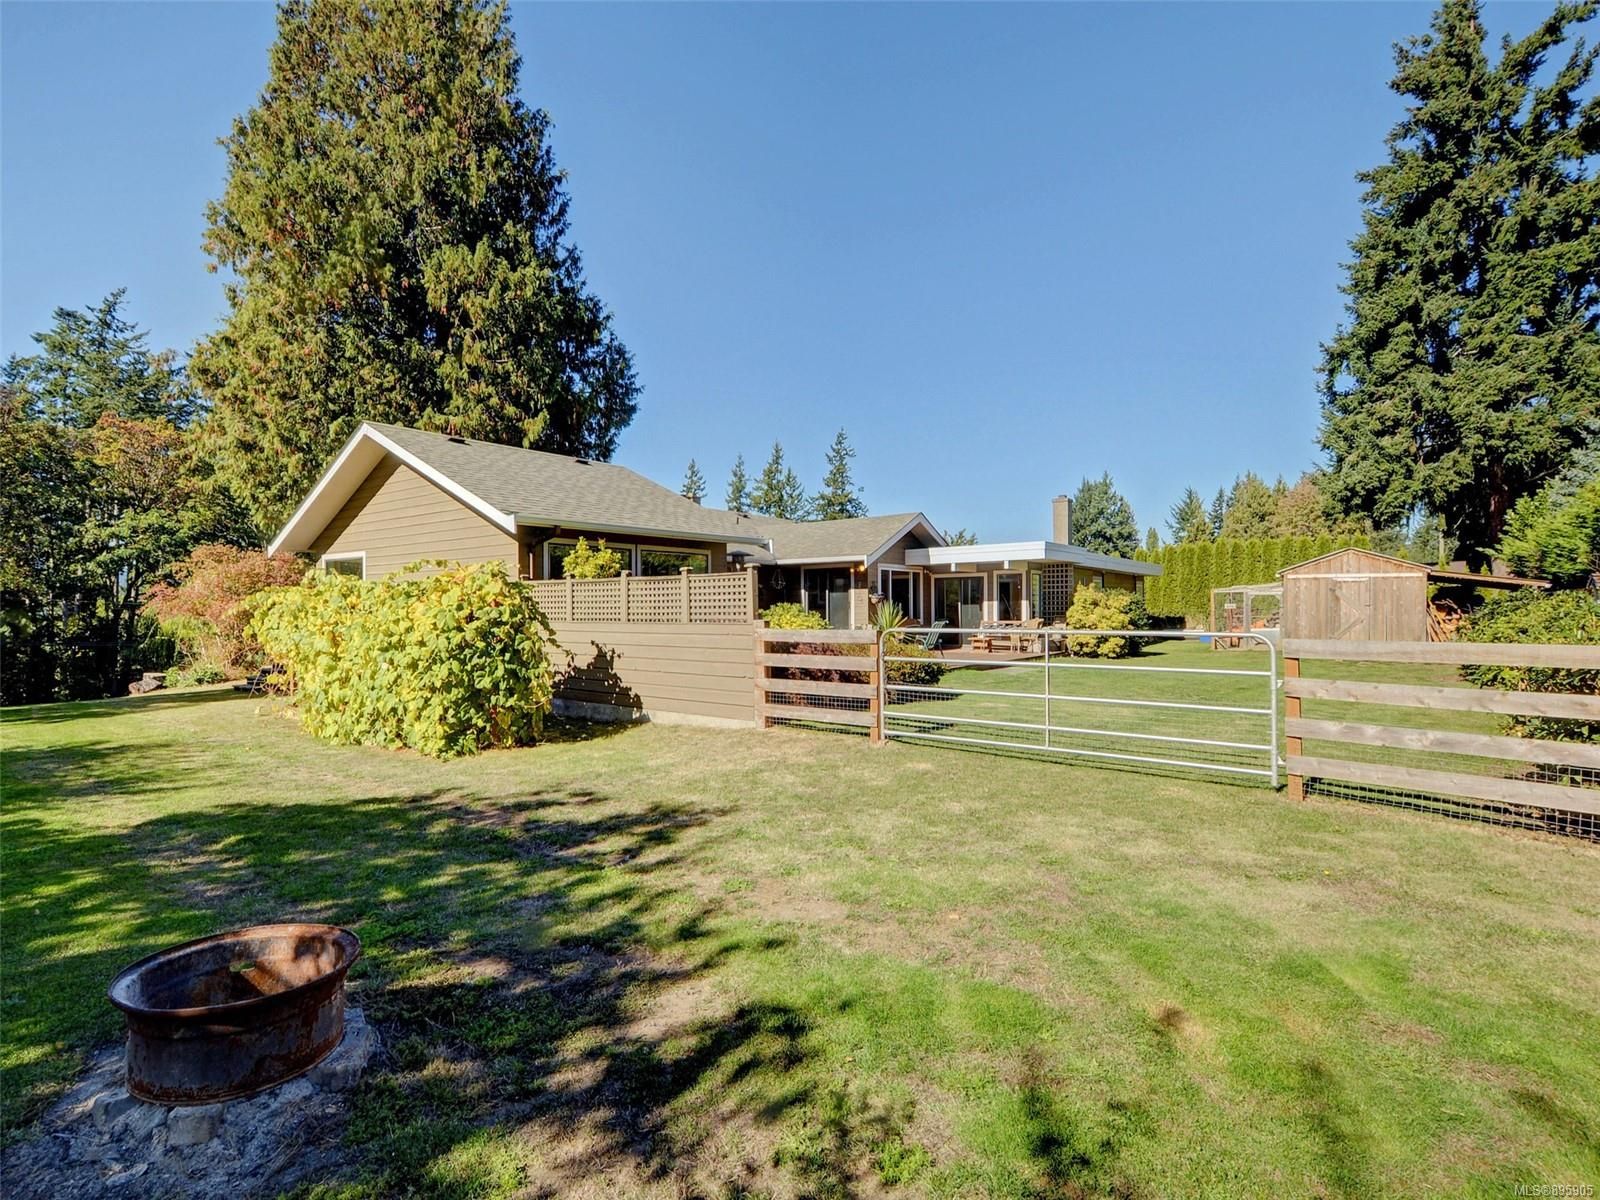 JUST LISTED: 5075 Santa Clara Ave in Saanich - $1,795,000